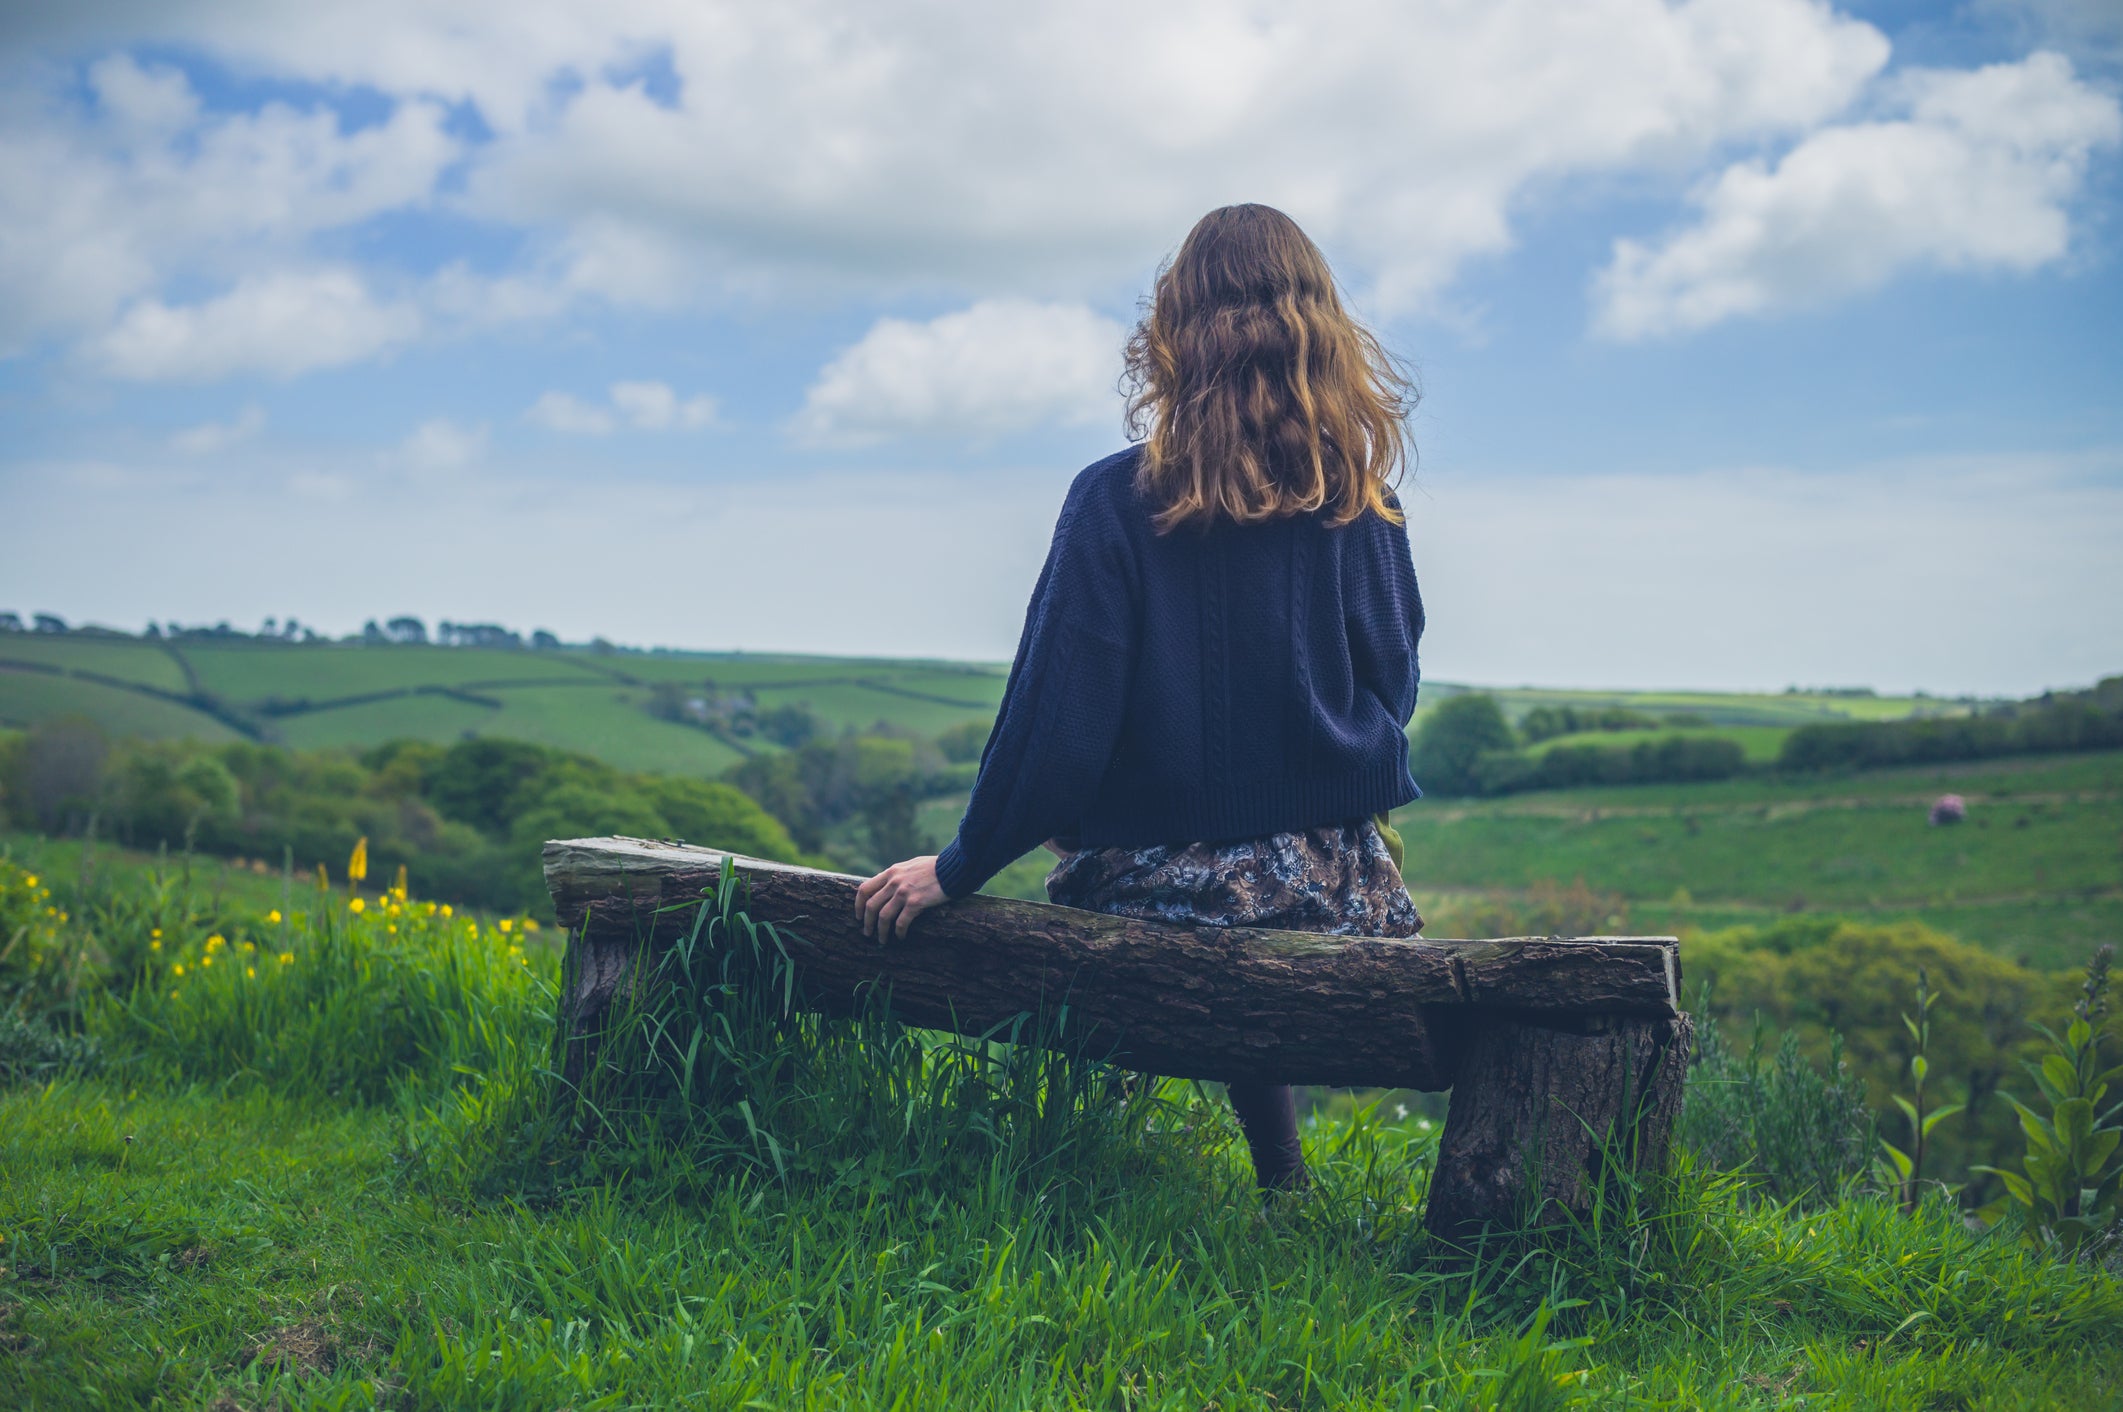 ‘Mindfulness helped me to see the worry and let it go without dwelling on it’